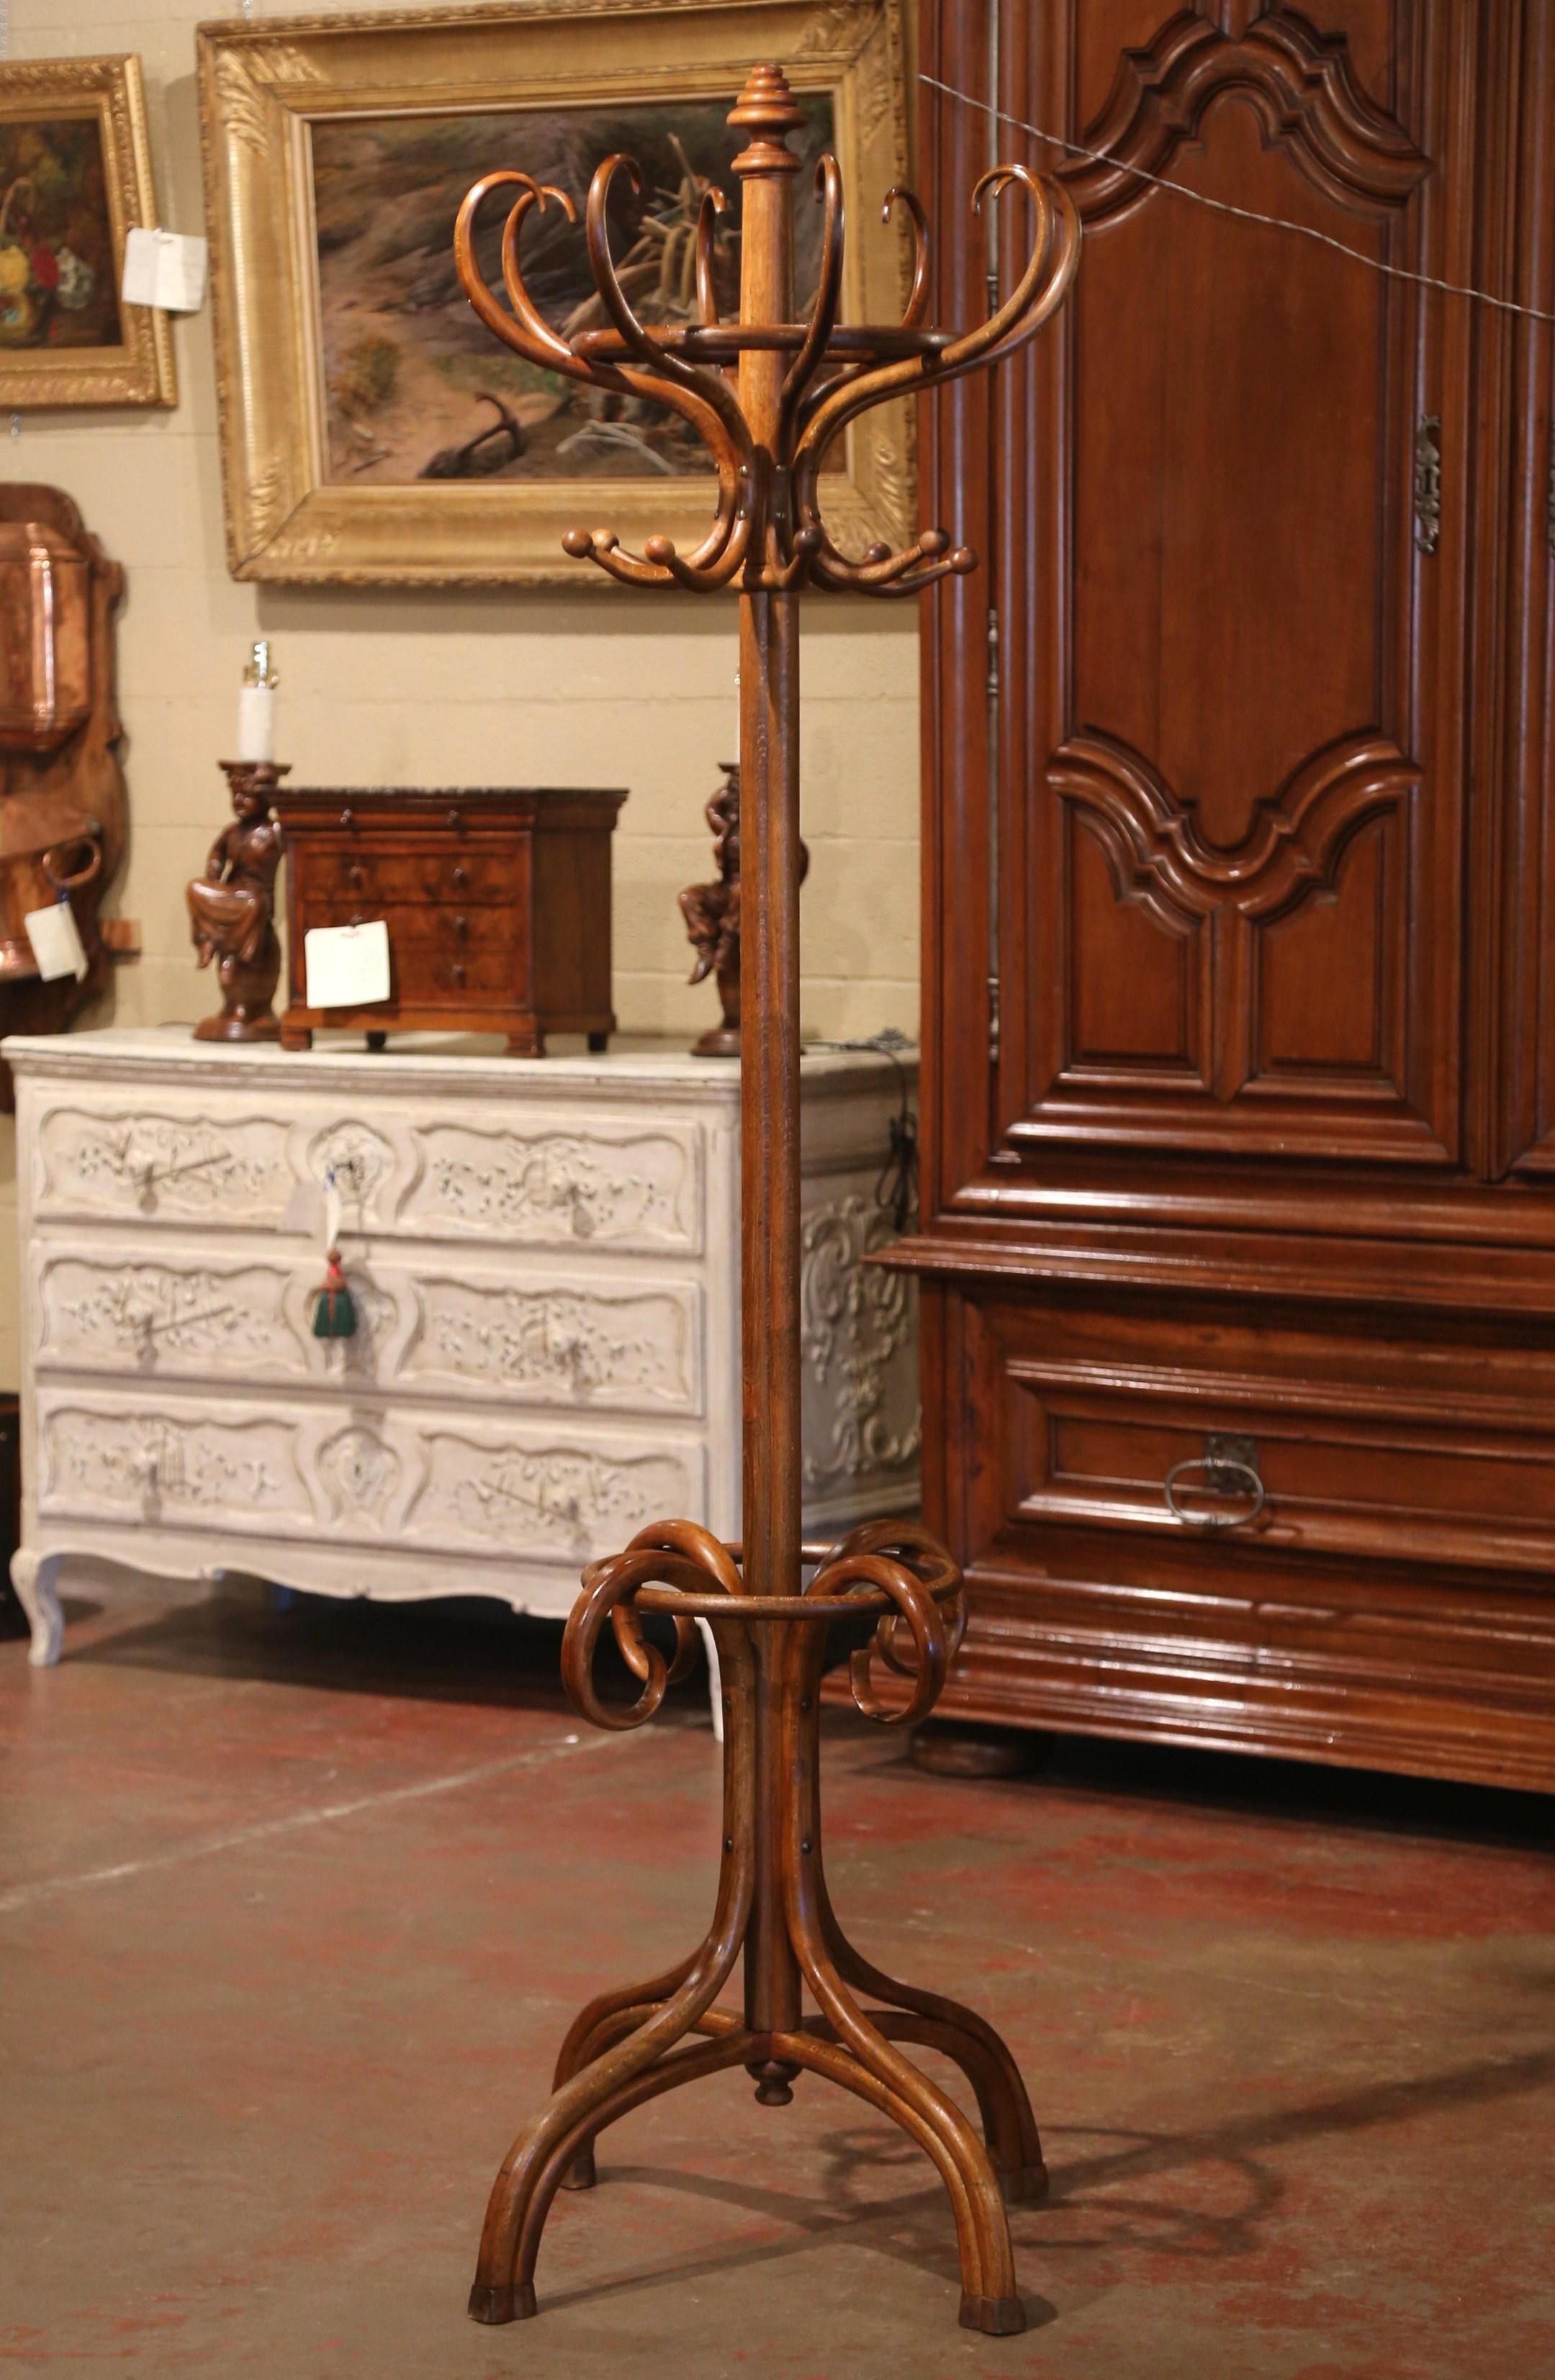 Bring a retro, yet practical touch to any entry or dressing area with this elegant, carved 